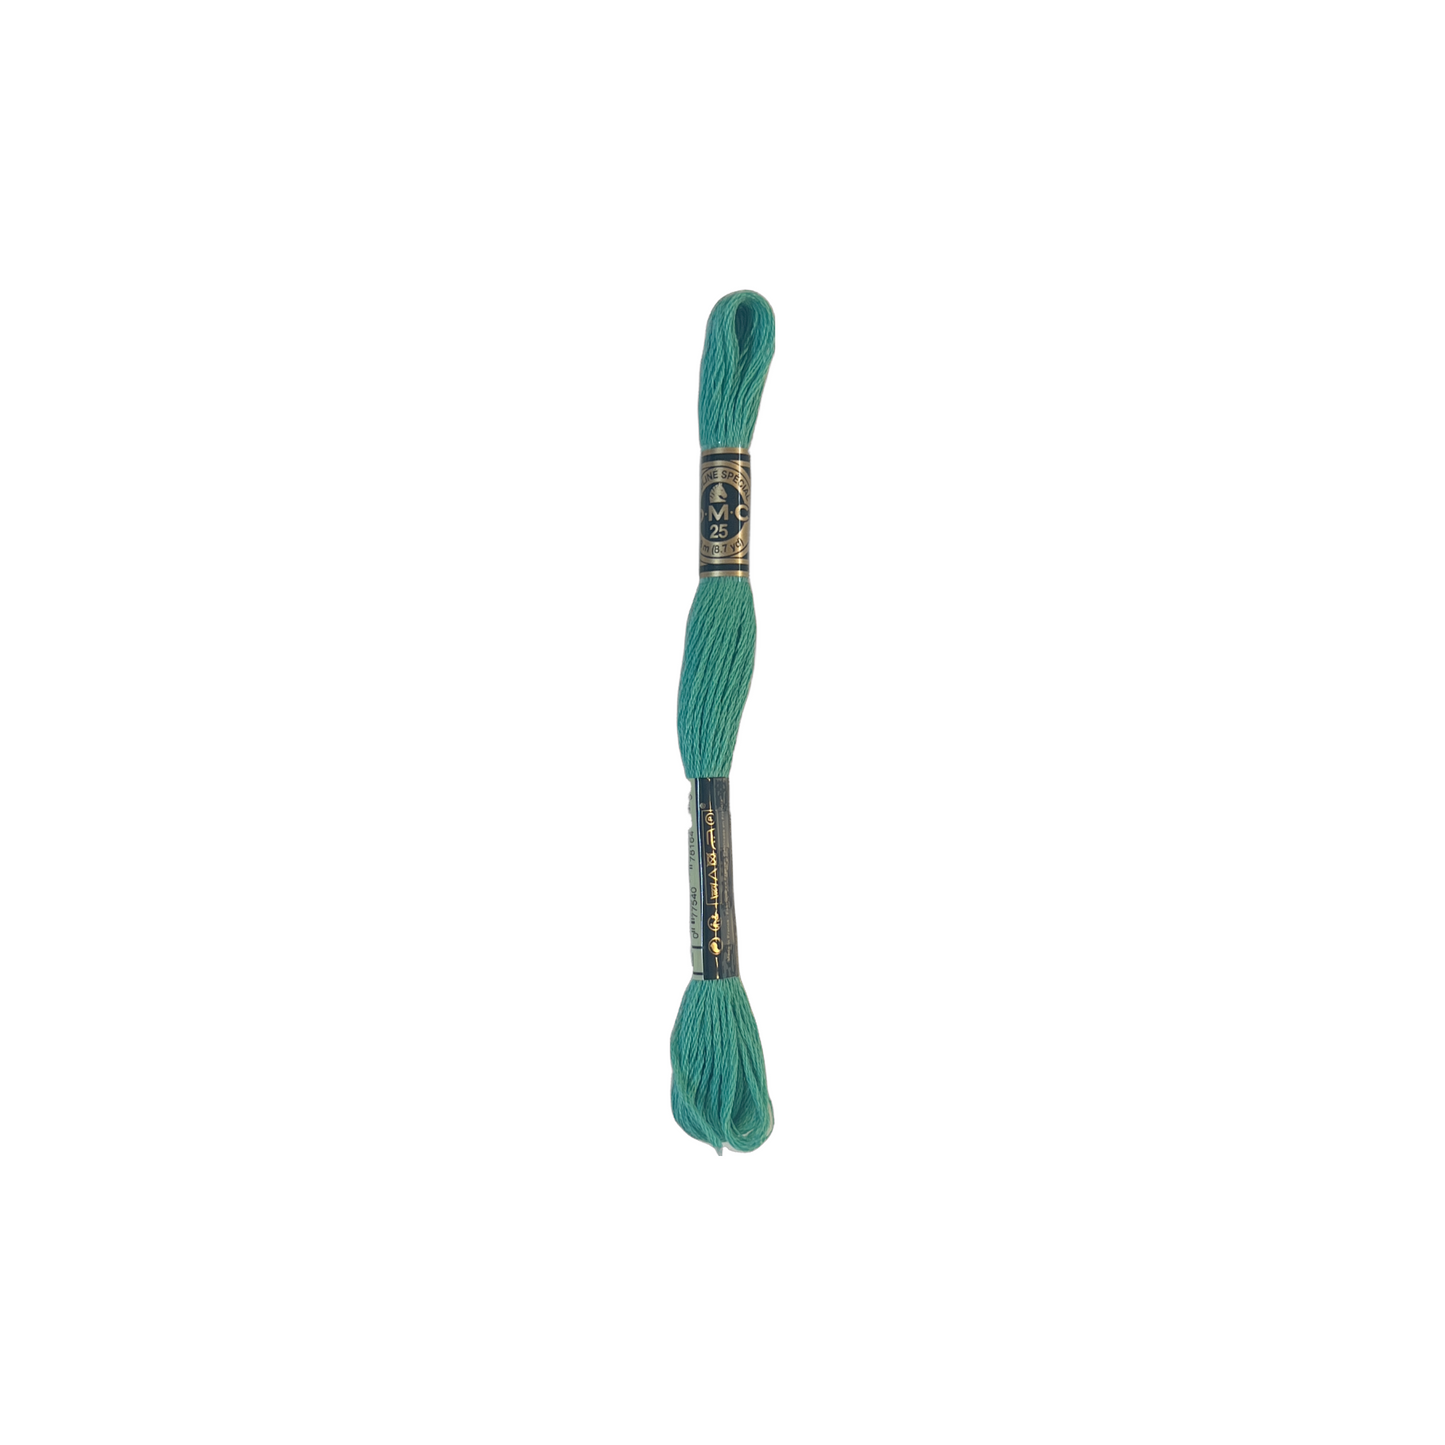 DMC 117-3851 Mouline Stranded Cotton Six Strand Embroidery Floss Thread, Light Bright Green